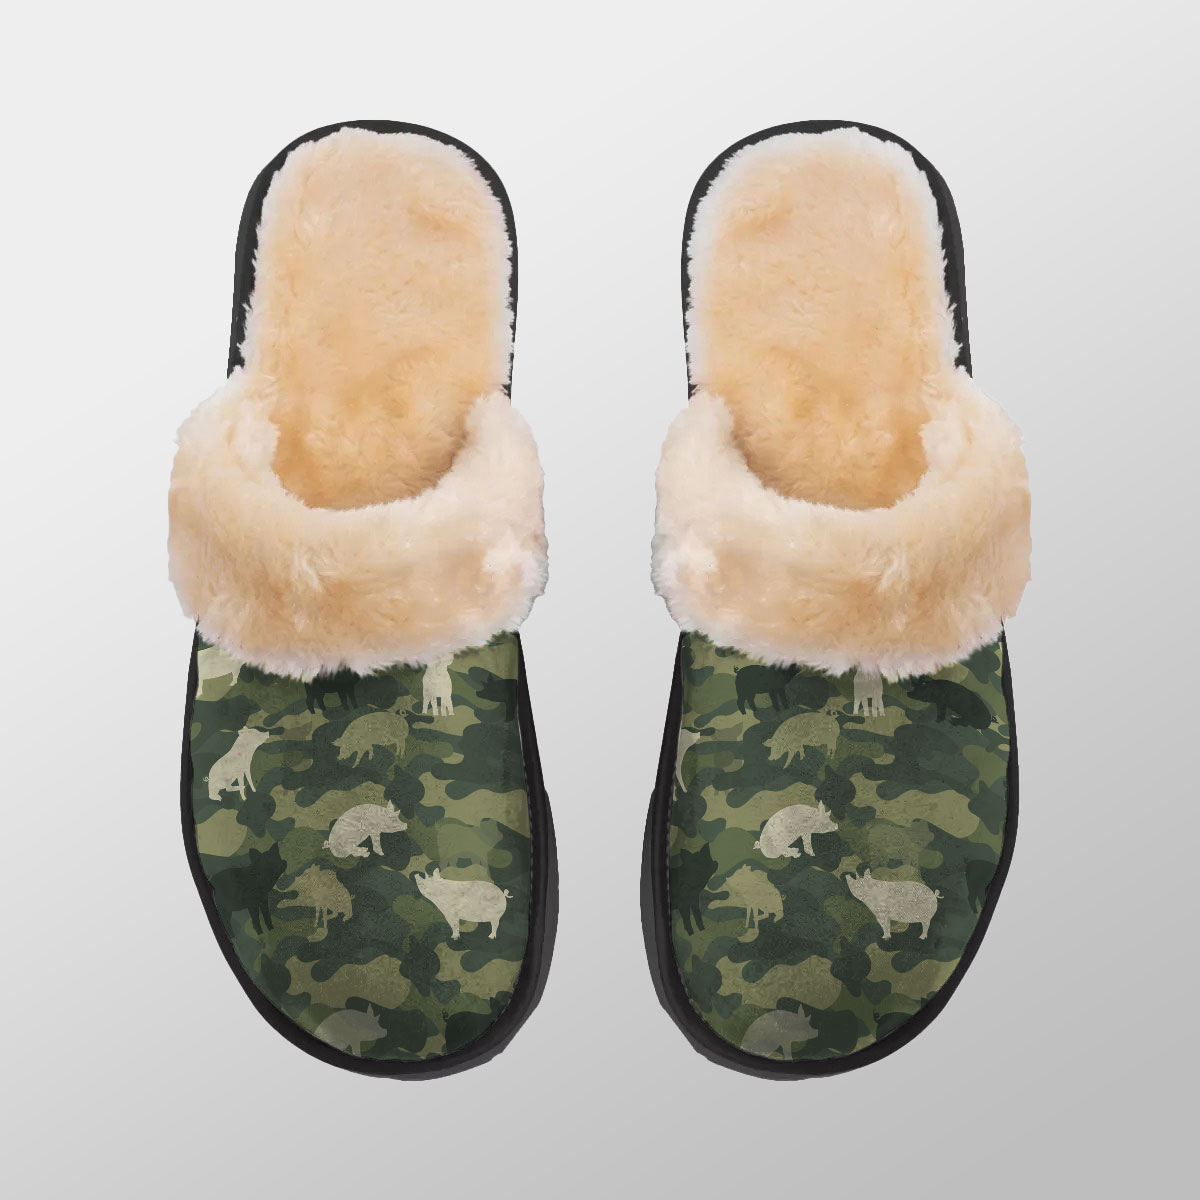 Pig Camo Pattern Home Plush Slippers